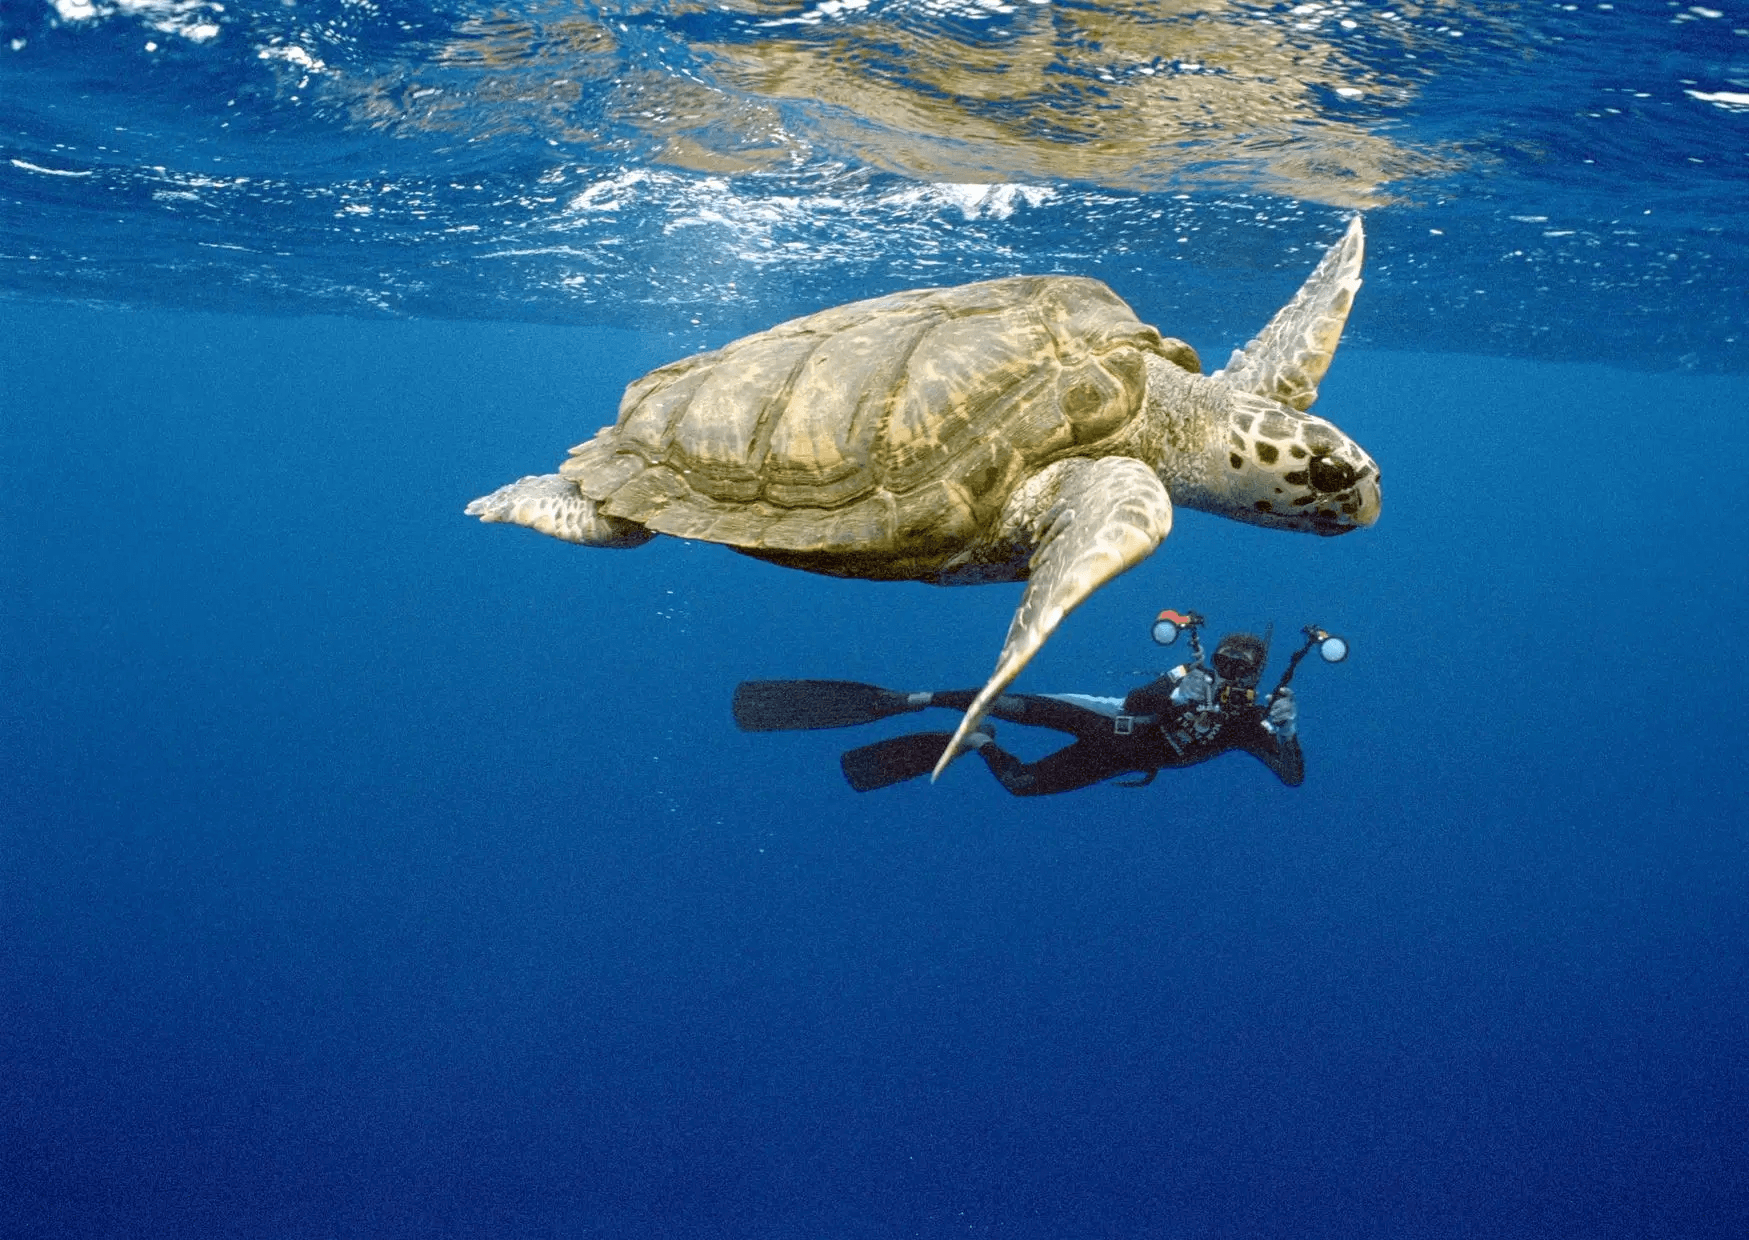 Underwater photo of a diver filming a turtle, representing Petrobras' environmental actions.